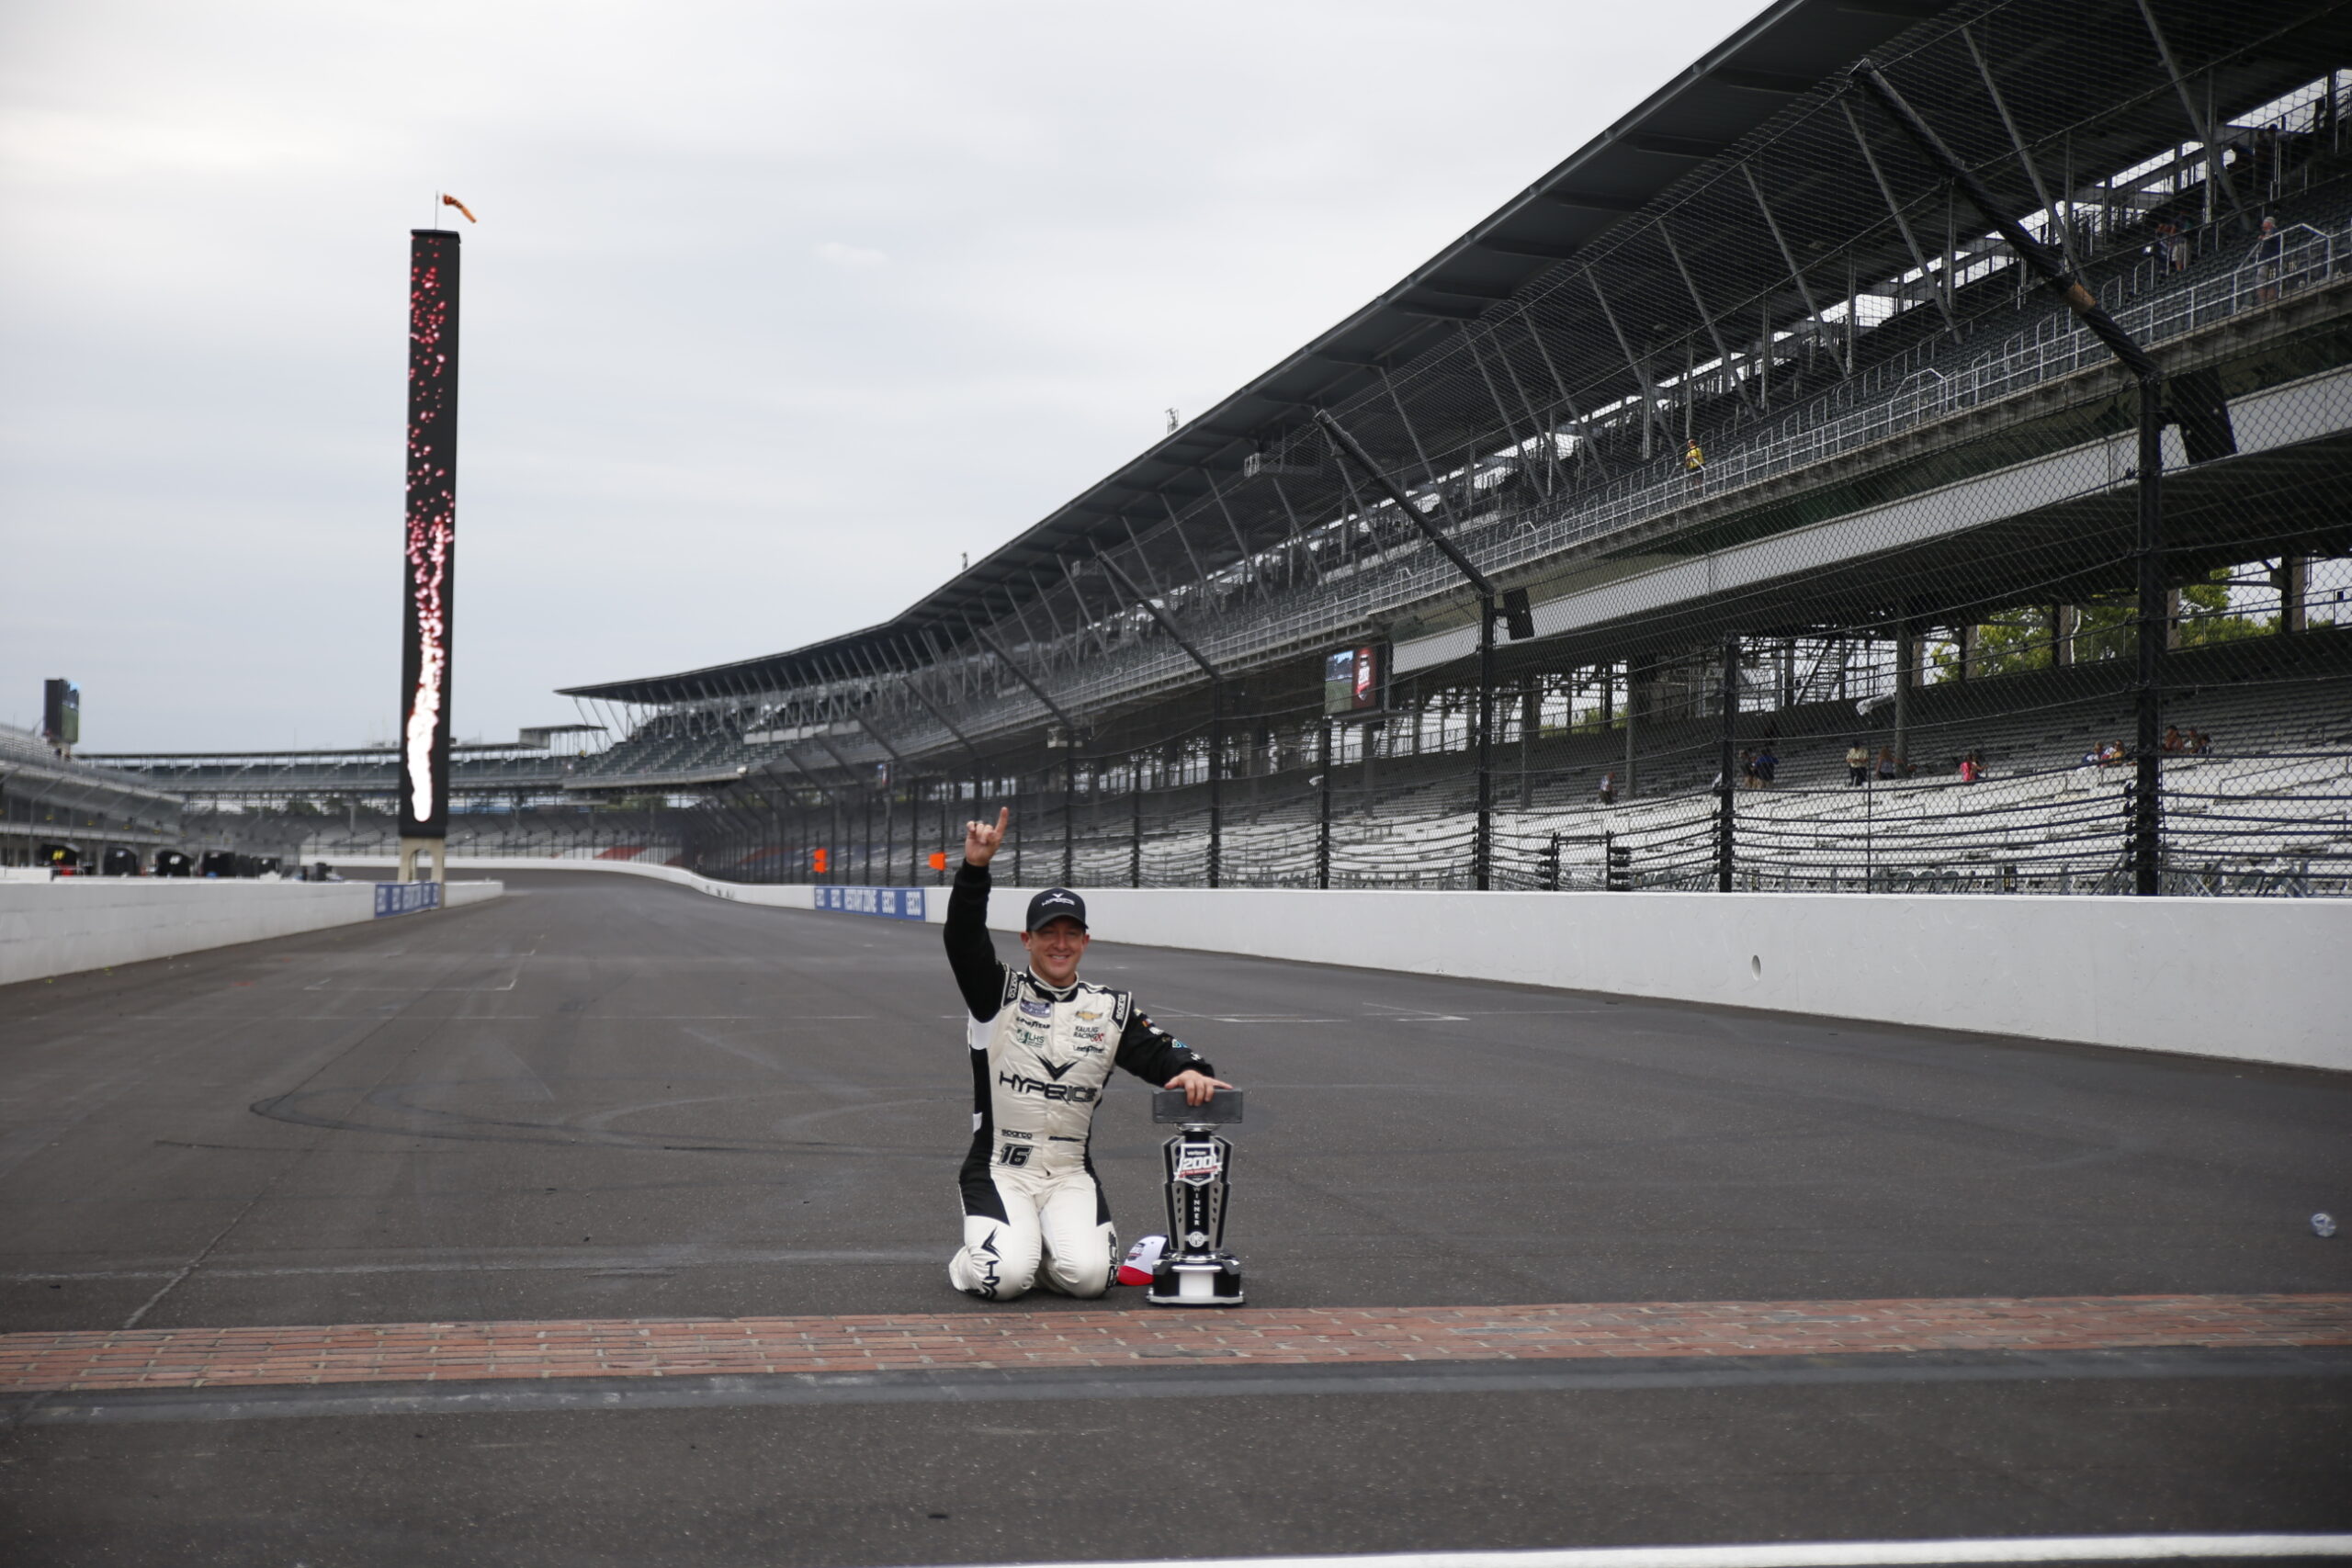 By all means, AJ Allmendinger enjoys his Verizon 200 at Indianapolis victory. (Photo: Stephen Conley | The Podium Finish)